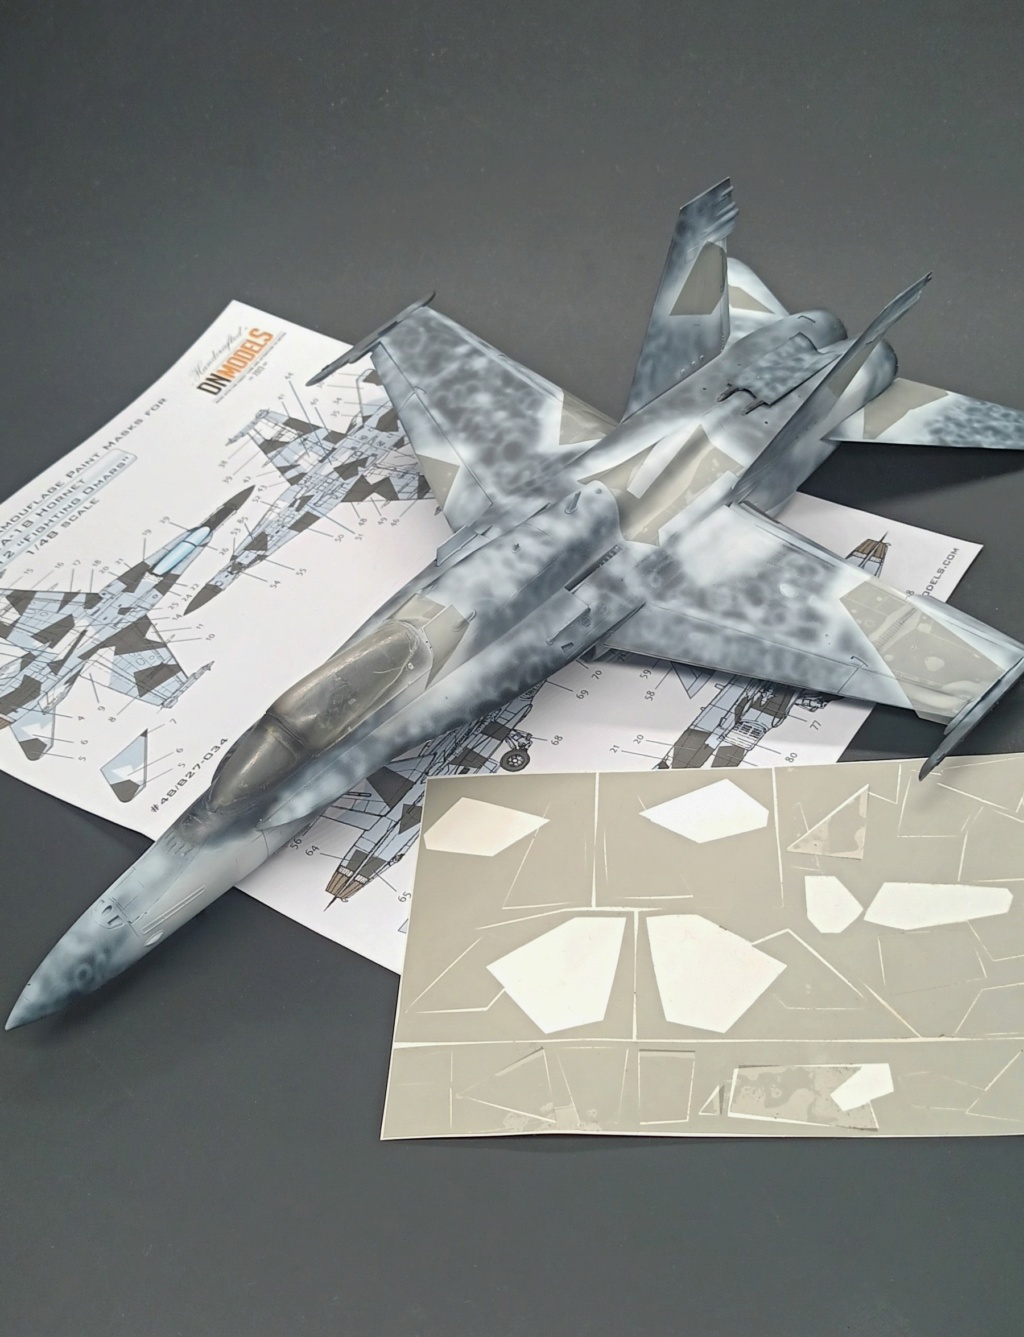 [Kinetic] 1/48  - McDonnell F/A-18A+ Hornet- VFC 12   / Double  [Tamiya] General Dynamics F-16C Fighting Falcon - 64th AGRS  1/48  - Aggressor - Page 5 20240318